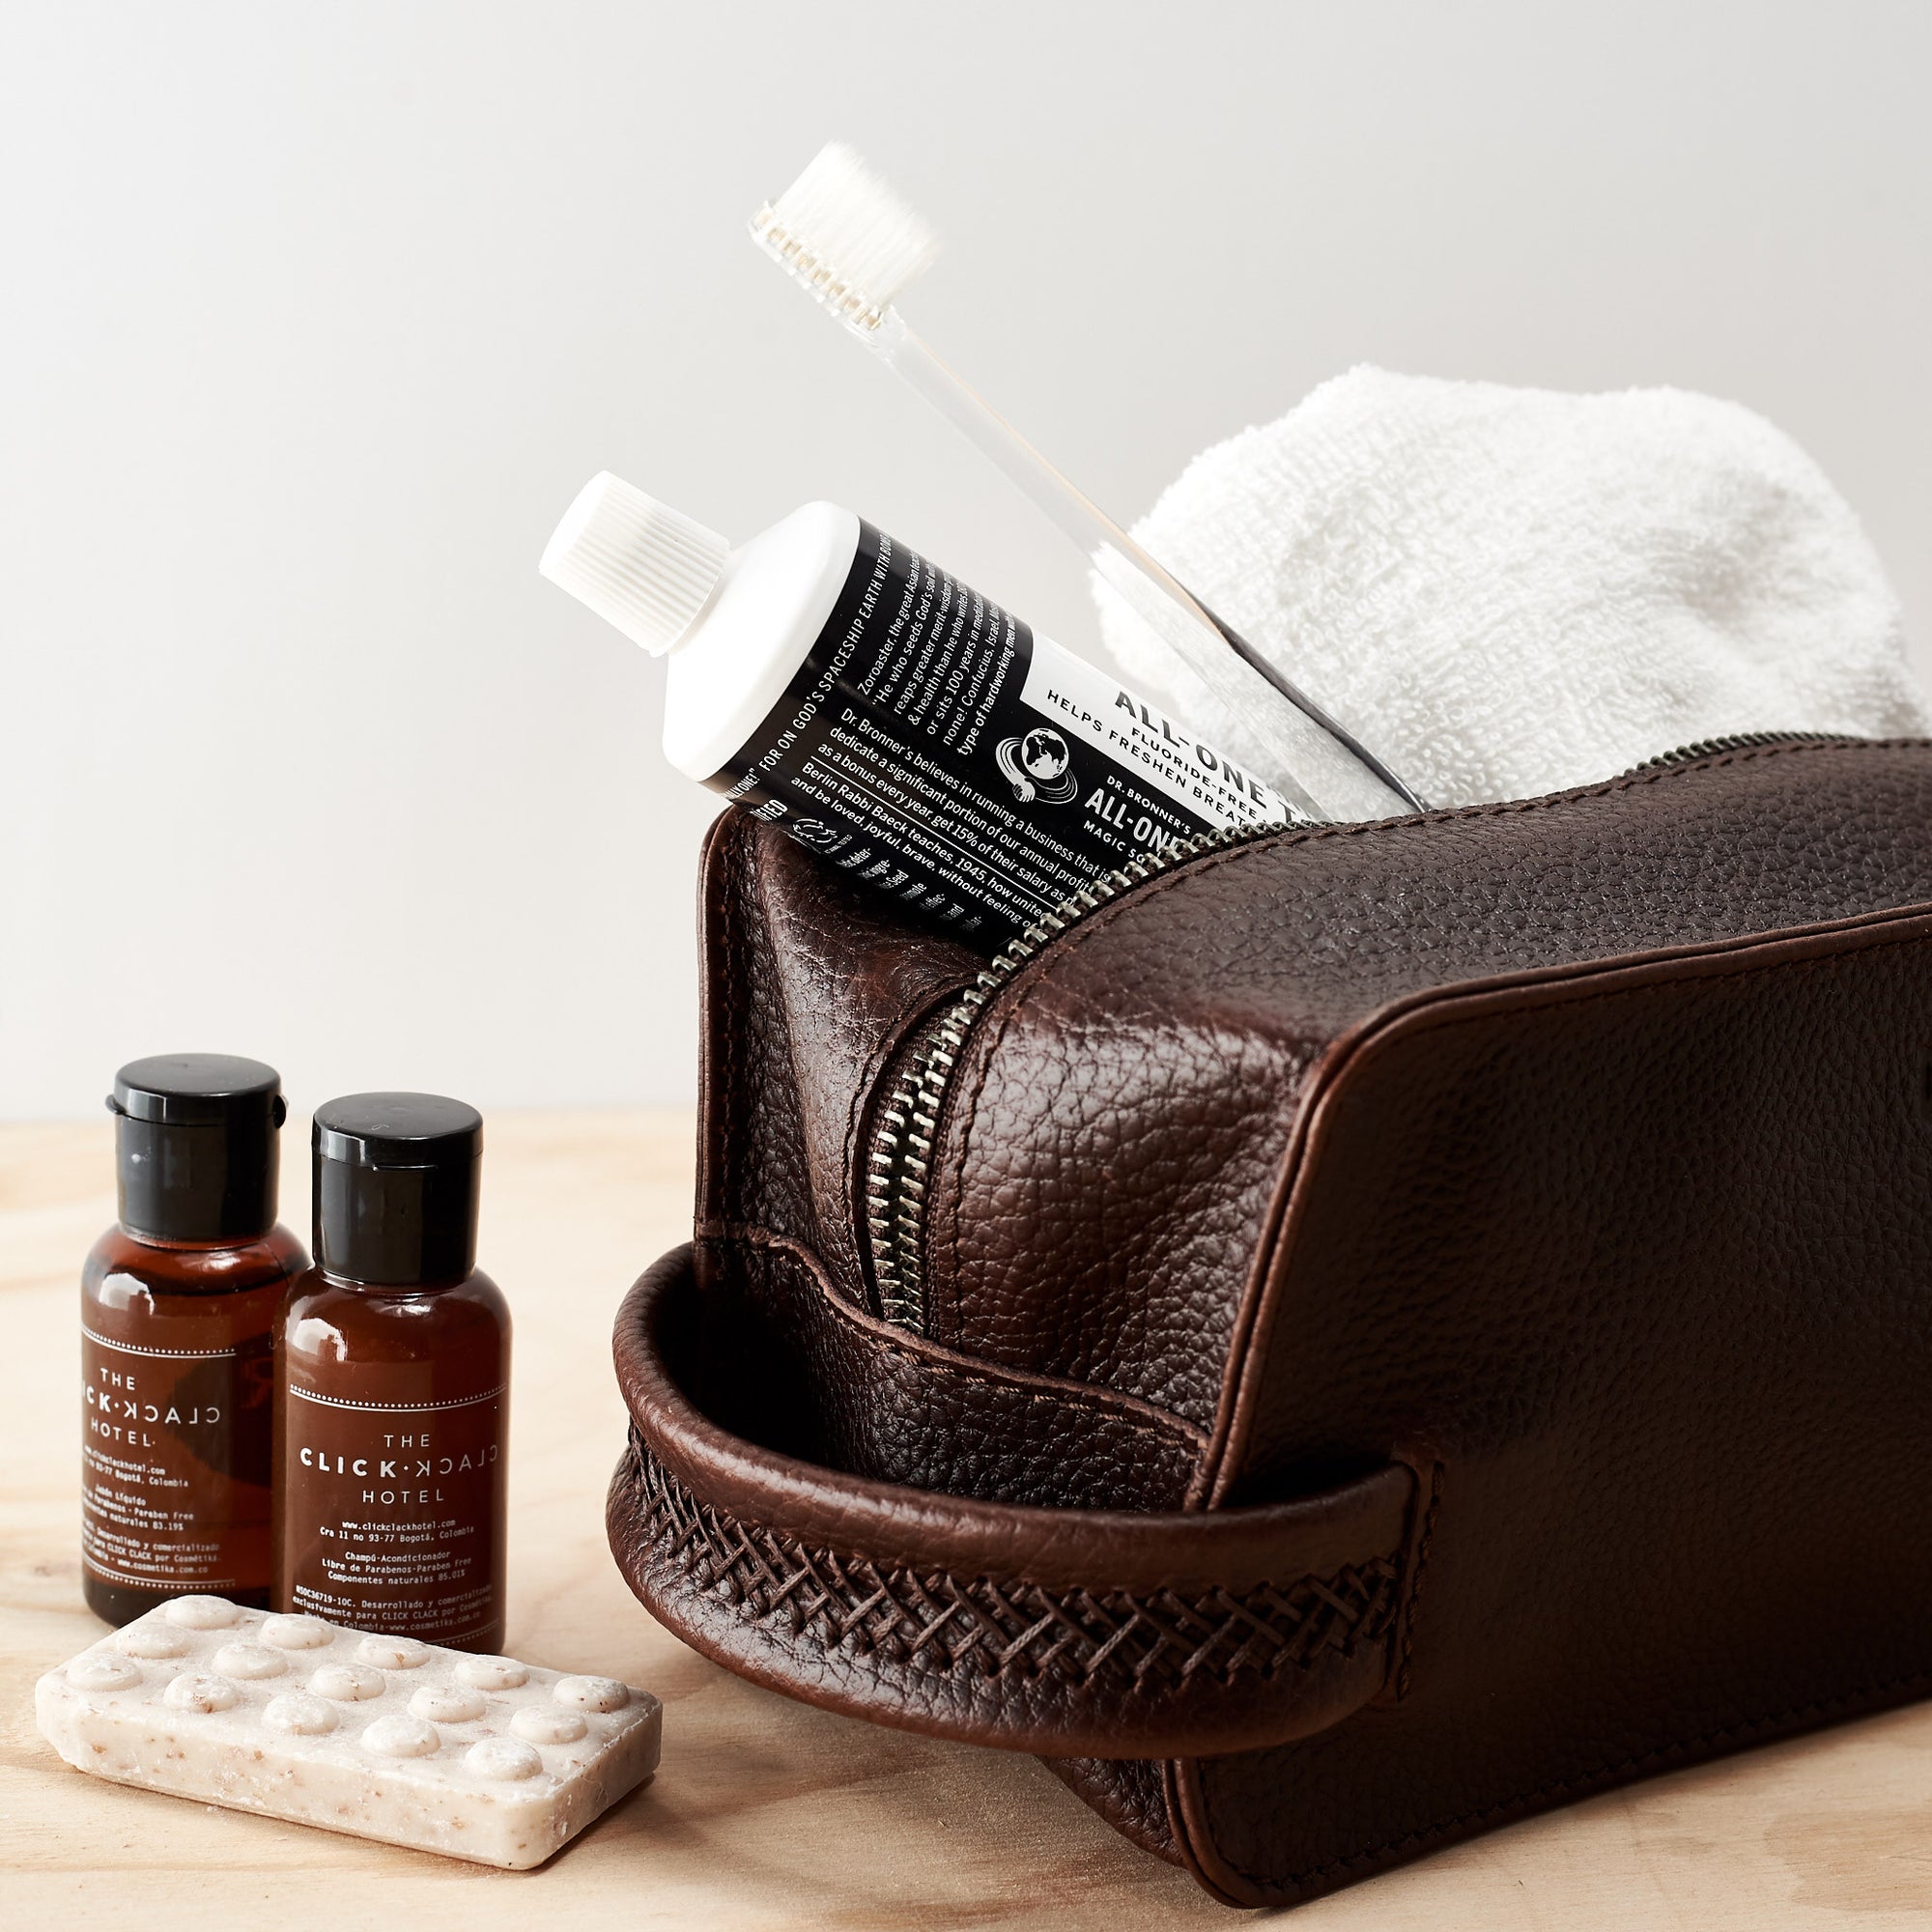 Style. Dark Brown leather toiletry, shaving bag with hand stitched handle. Groomsmen gifts